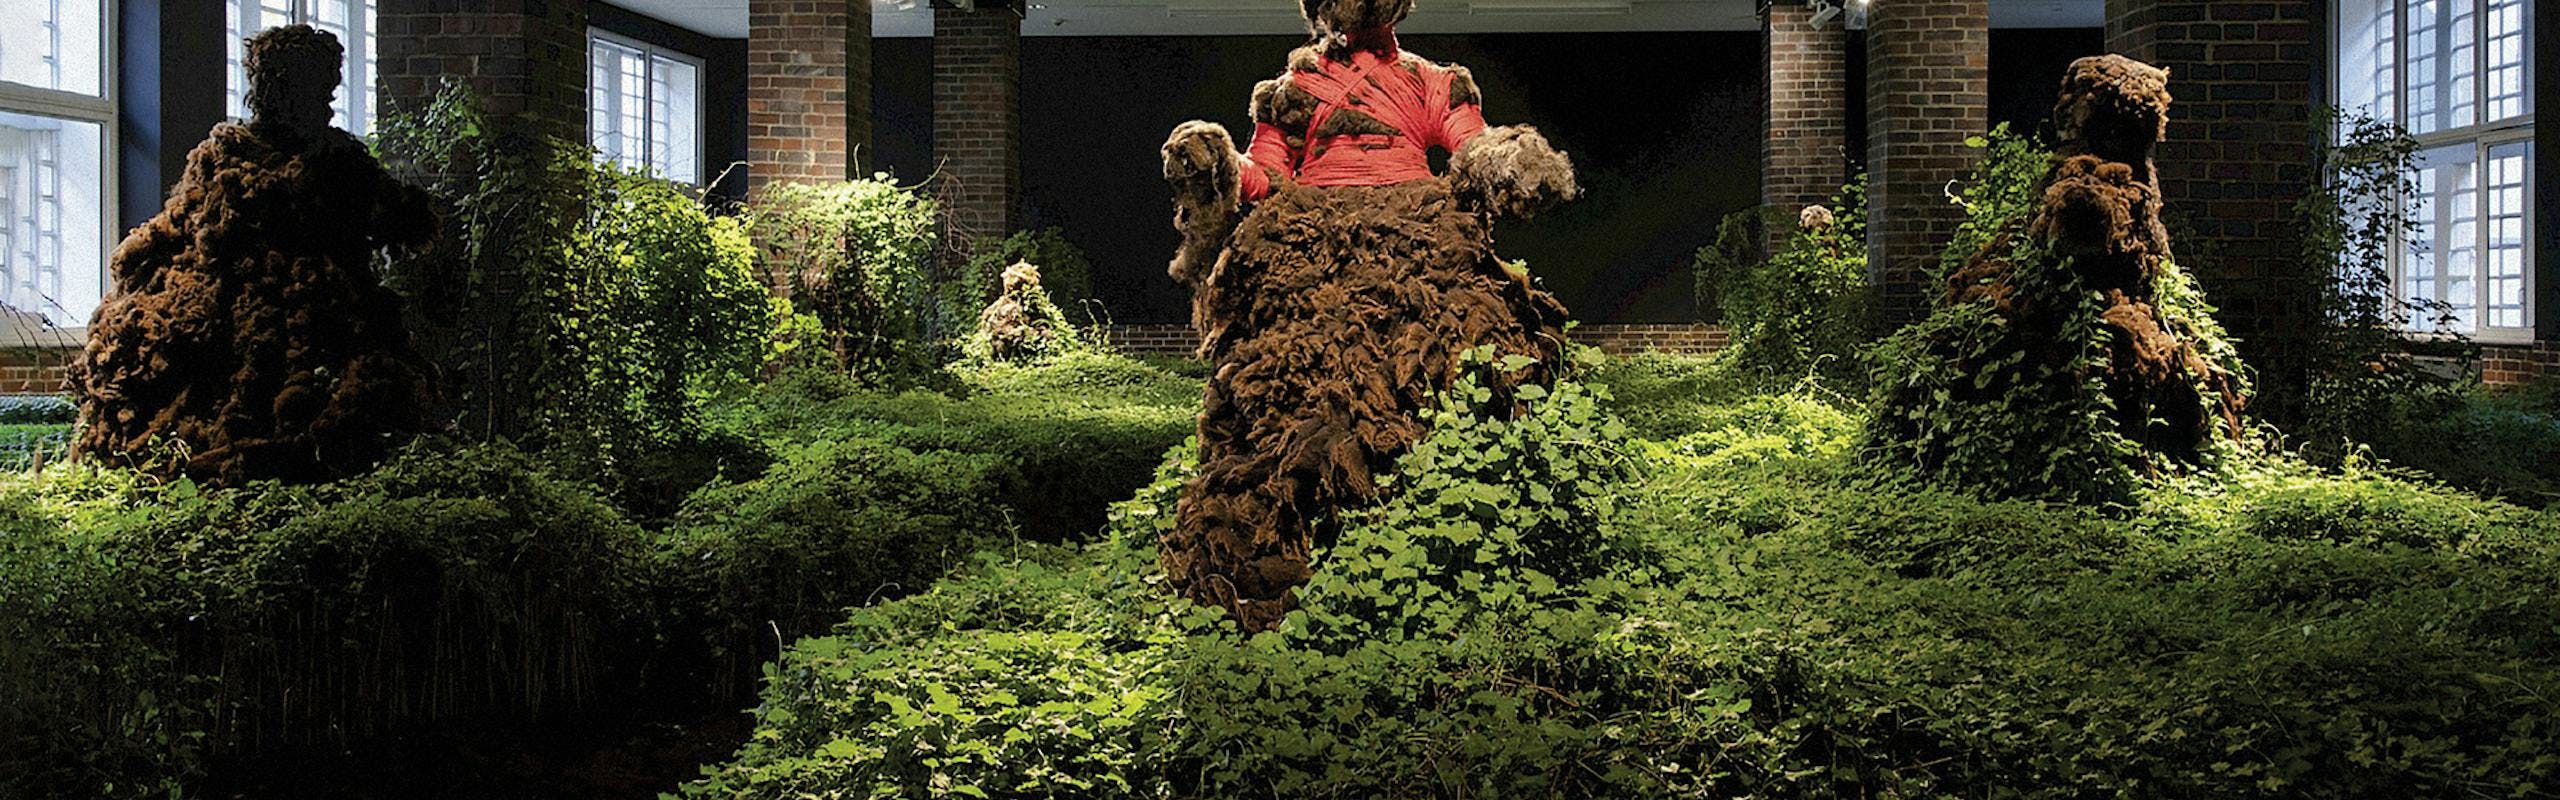 A collection of green, brown, and pink moss like flowers cover statues shaped like women to make "Open cirlce Lived Relation;